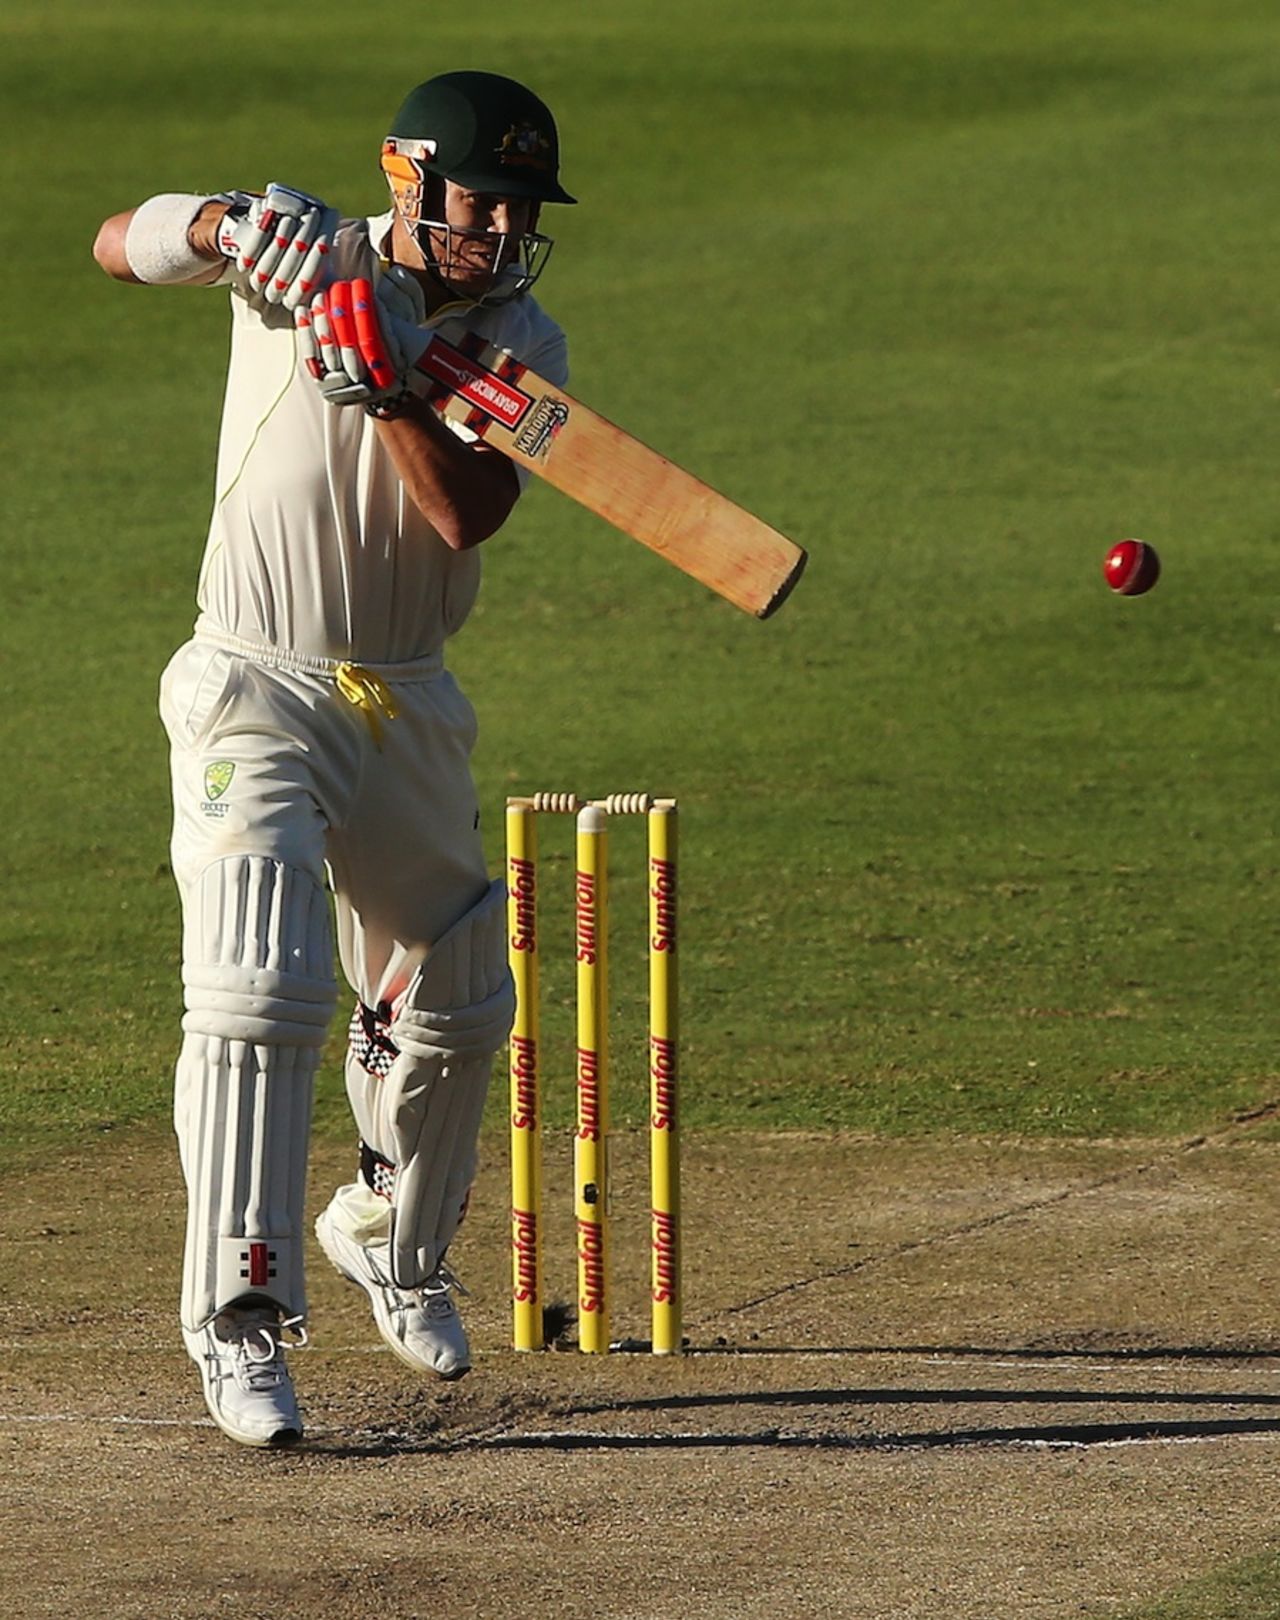 David Warner crunched four boundaries before stumps, South Africa v Australia, 3rd Test, Cape Town, 3rd day, March 3, 2014